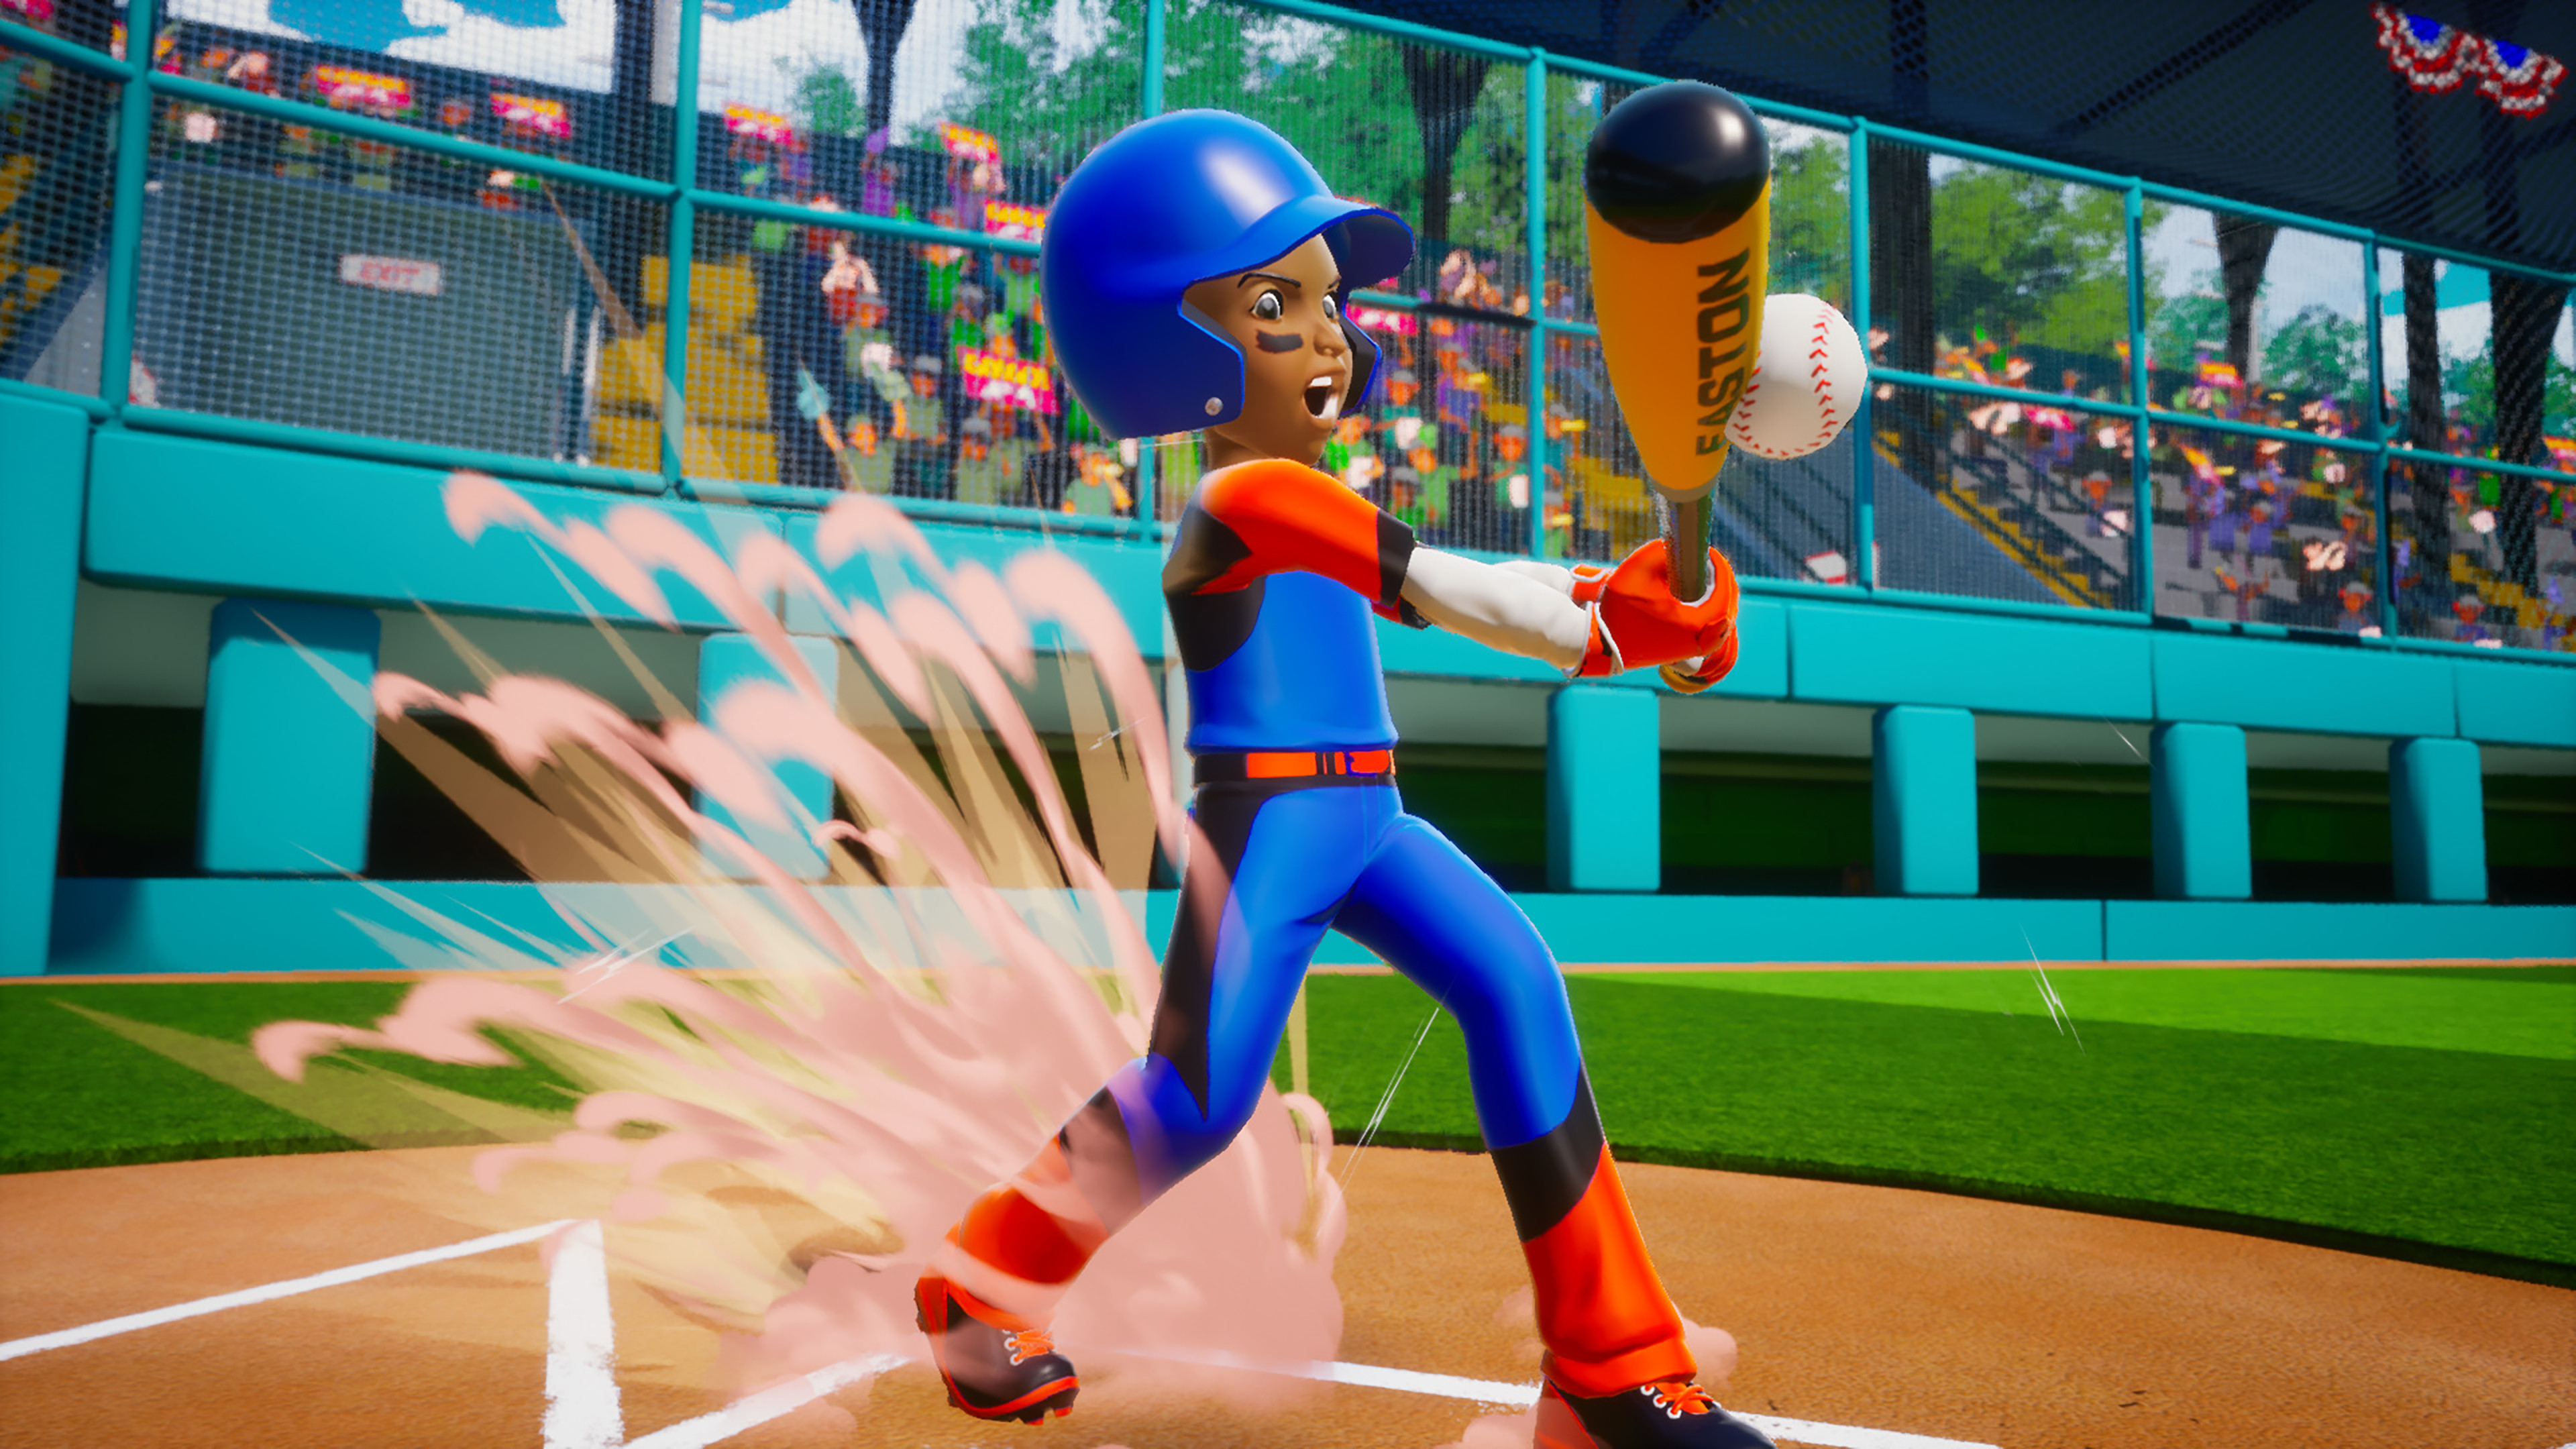 Little League World Series Baseball 2022 Free Download for PC